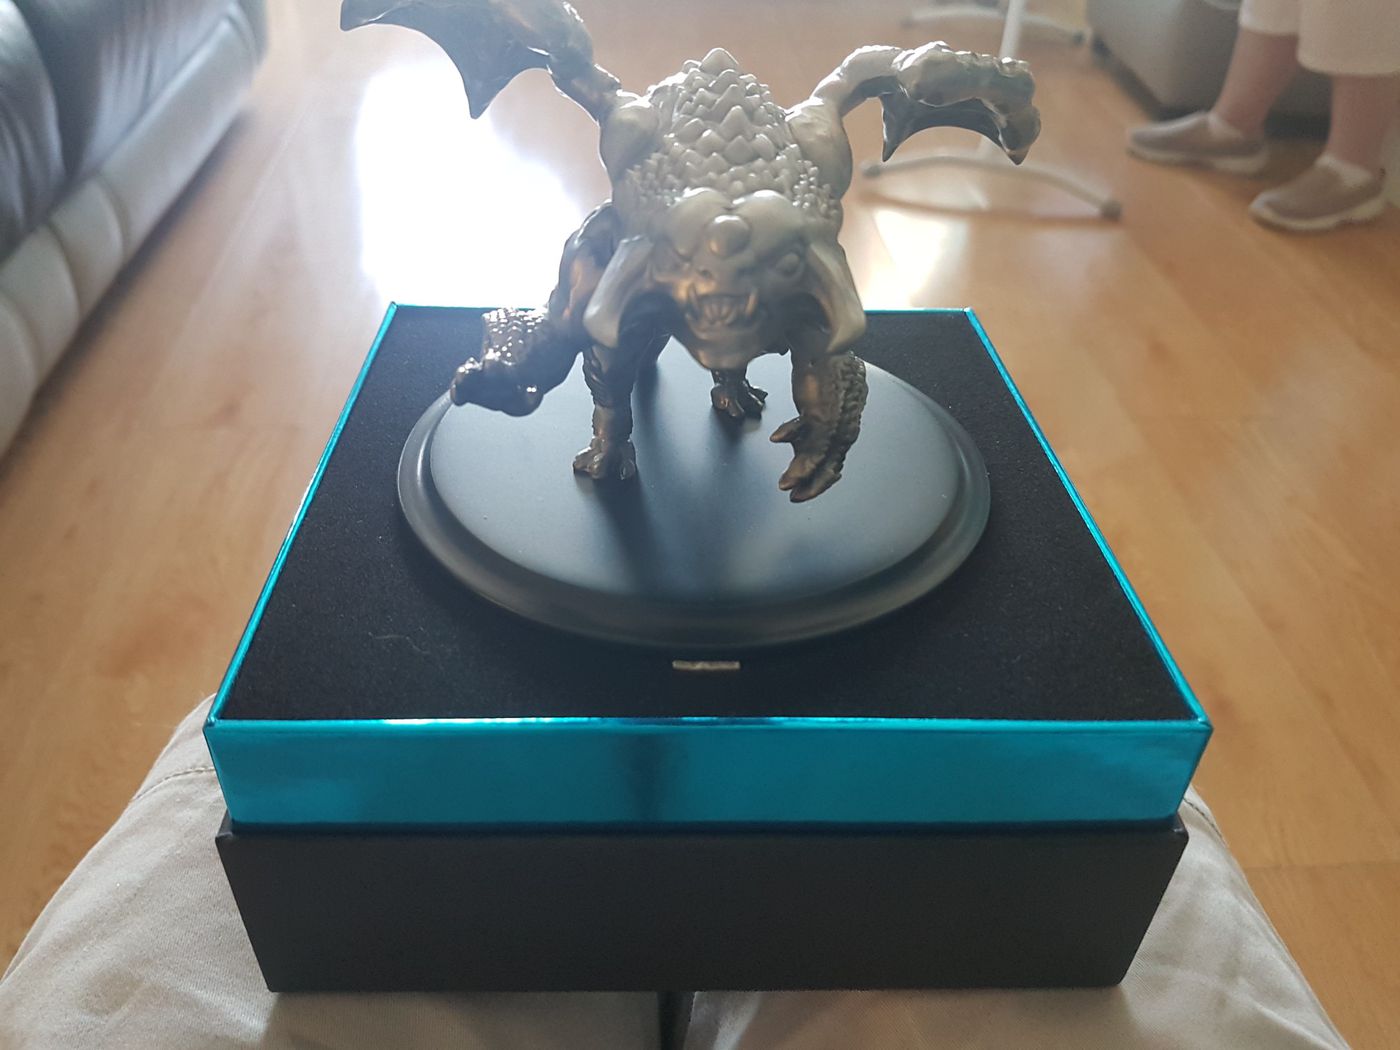 Dota 2 Baby Roshan statuette quality prompts Valve response, reissuing -  The Flying Courier